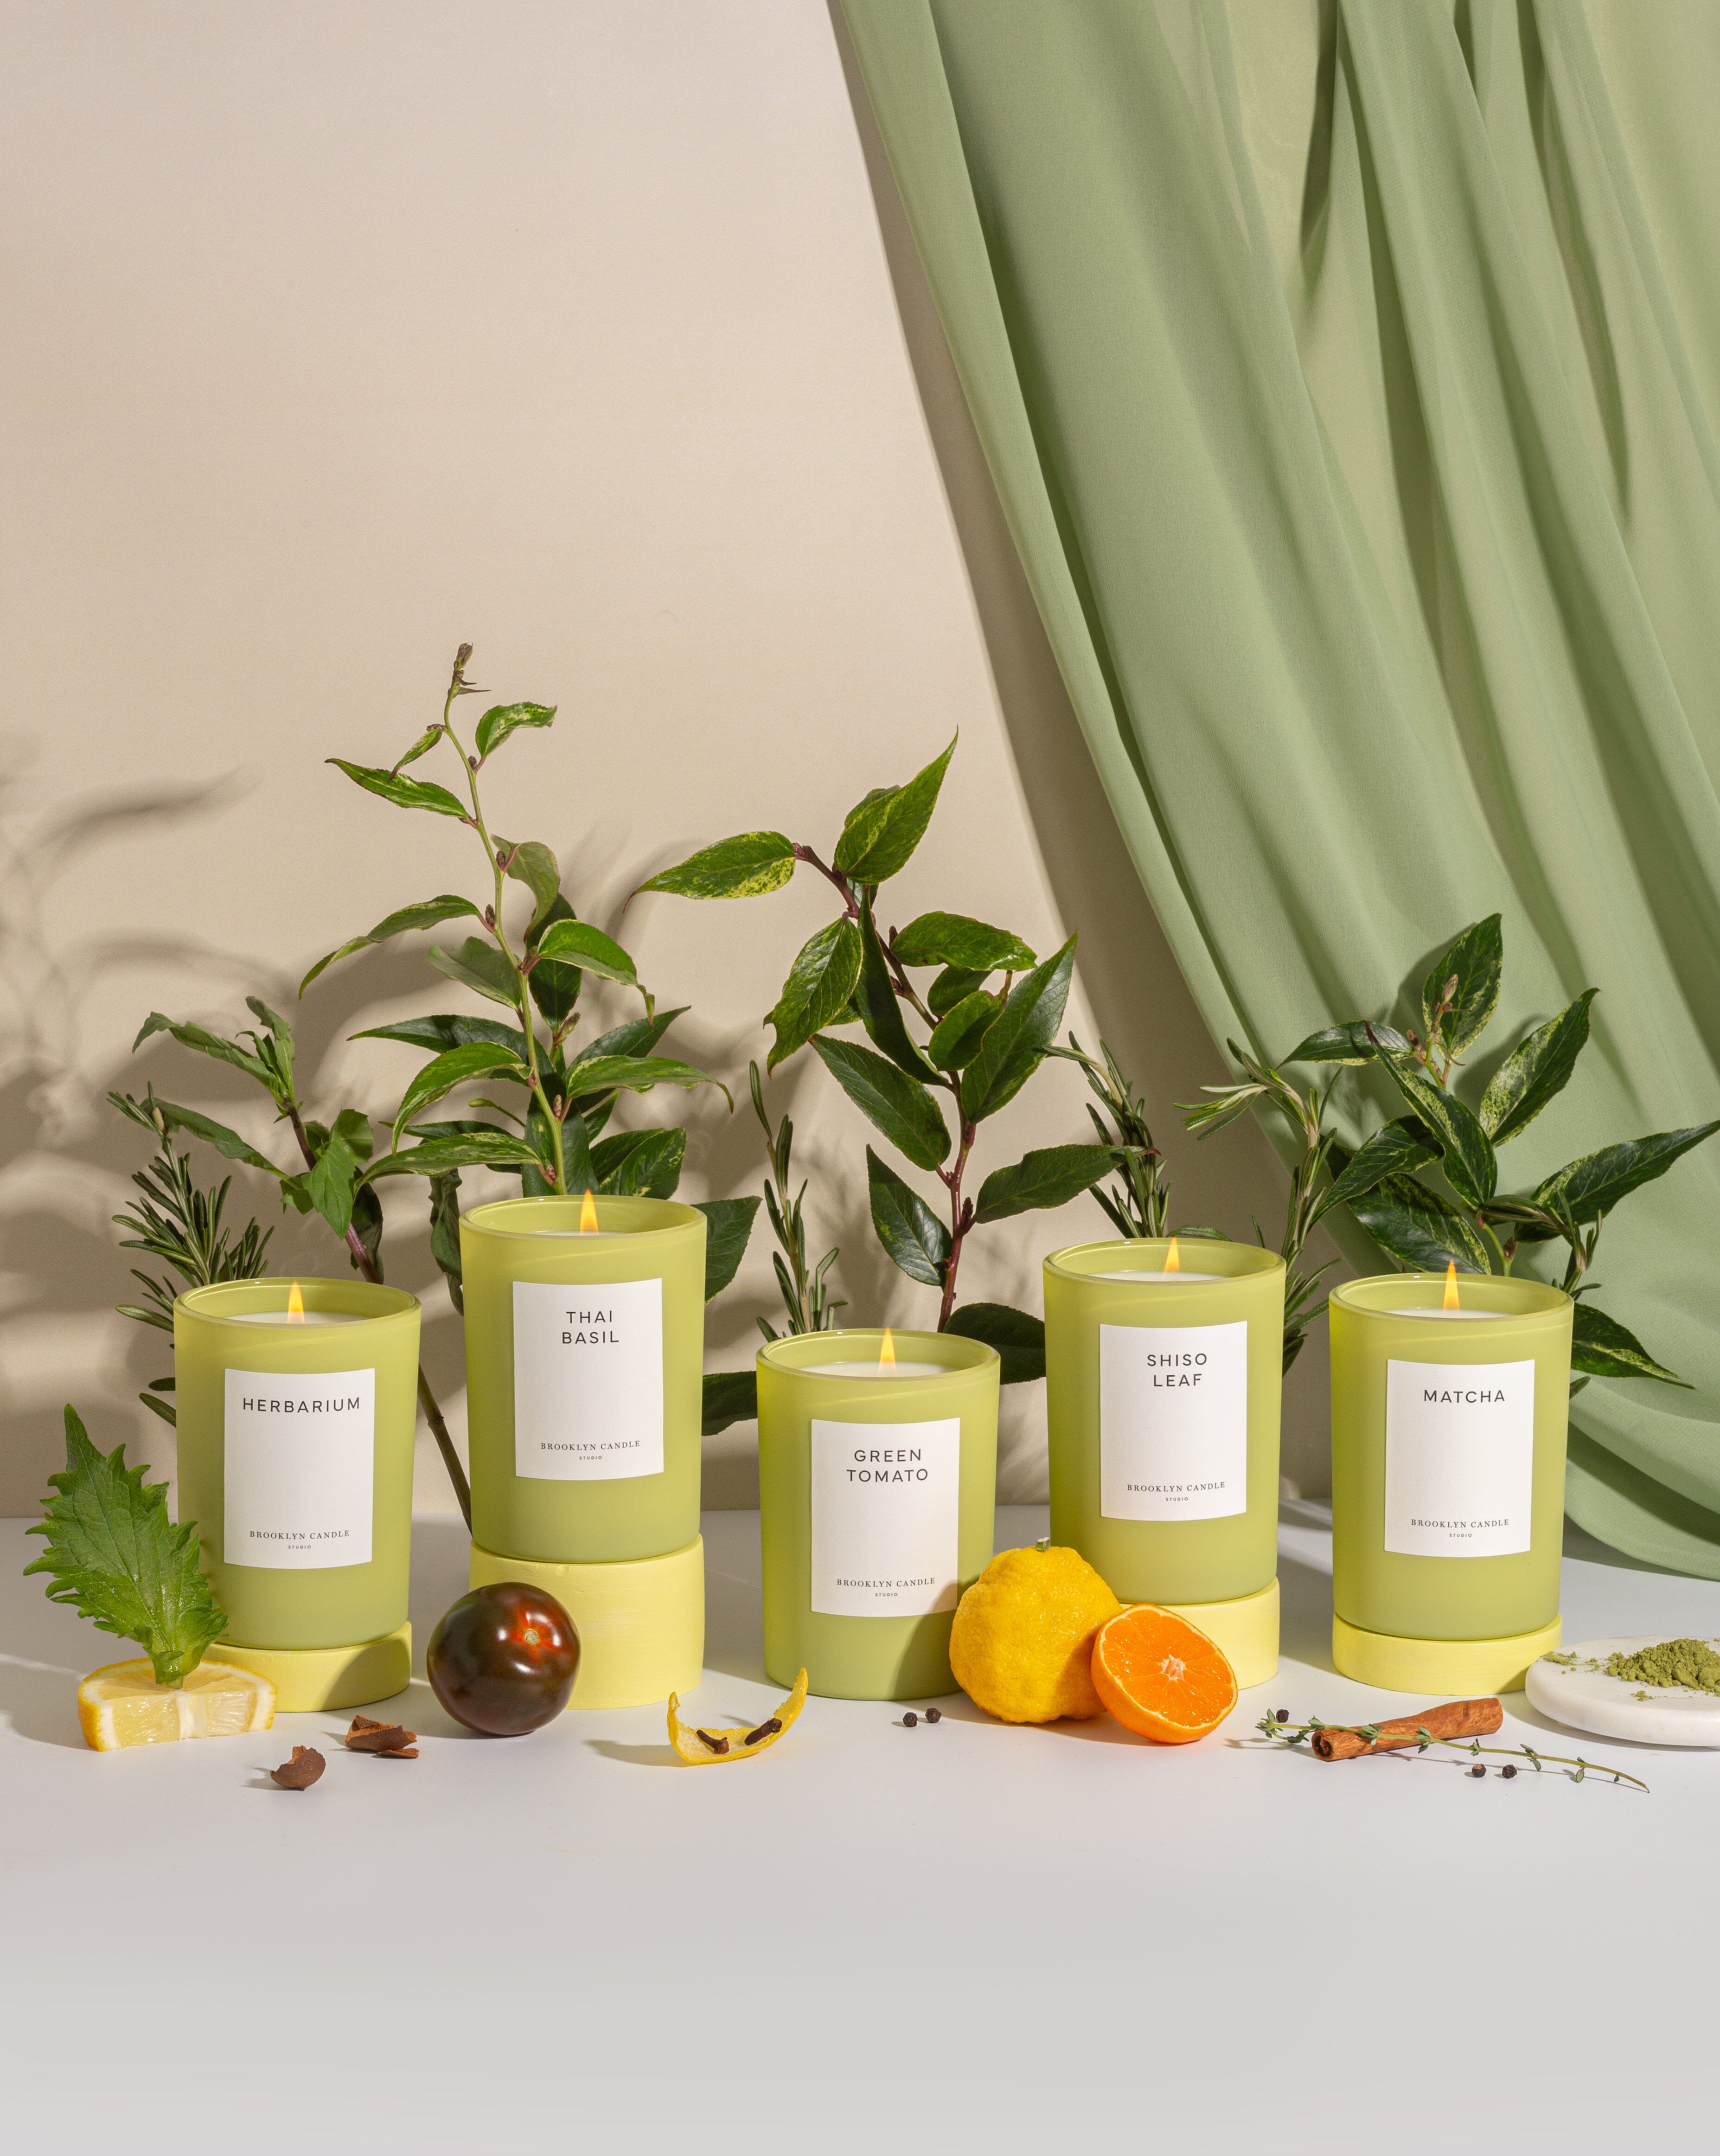 Green Tomato Limited Edition Candle Herbarium Collection Brooklyn Candle Studio 